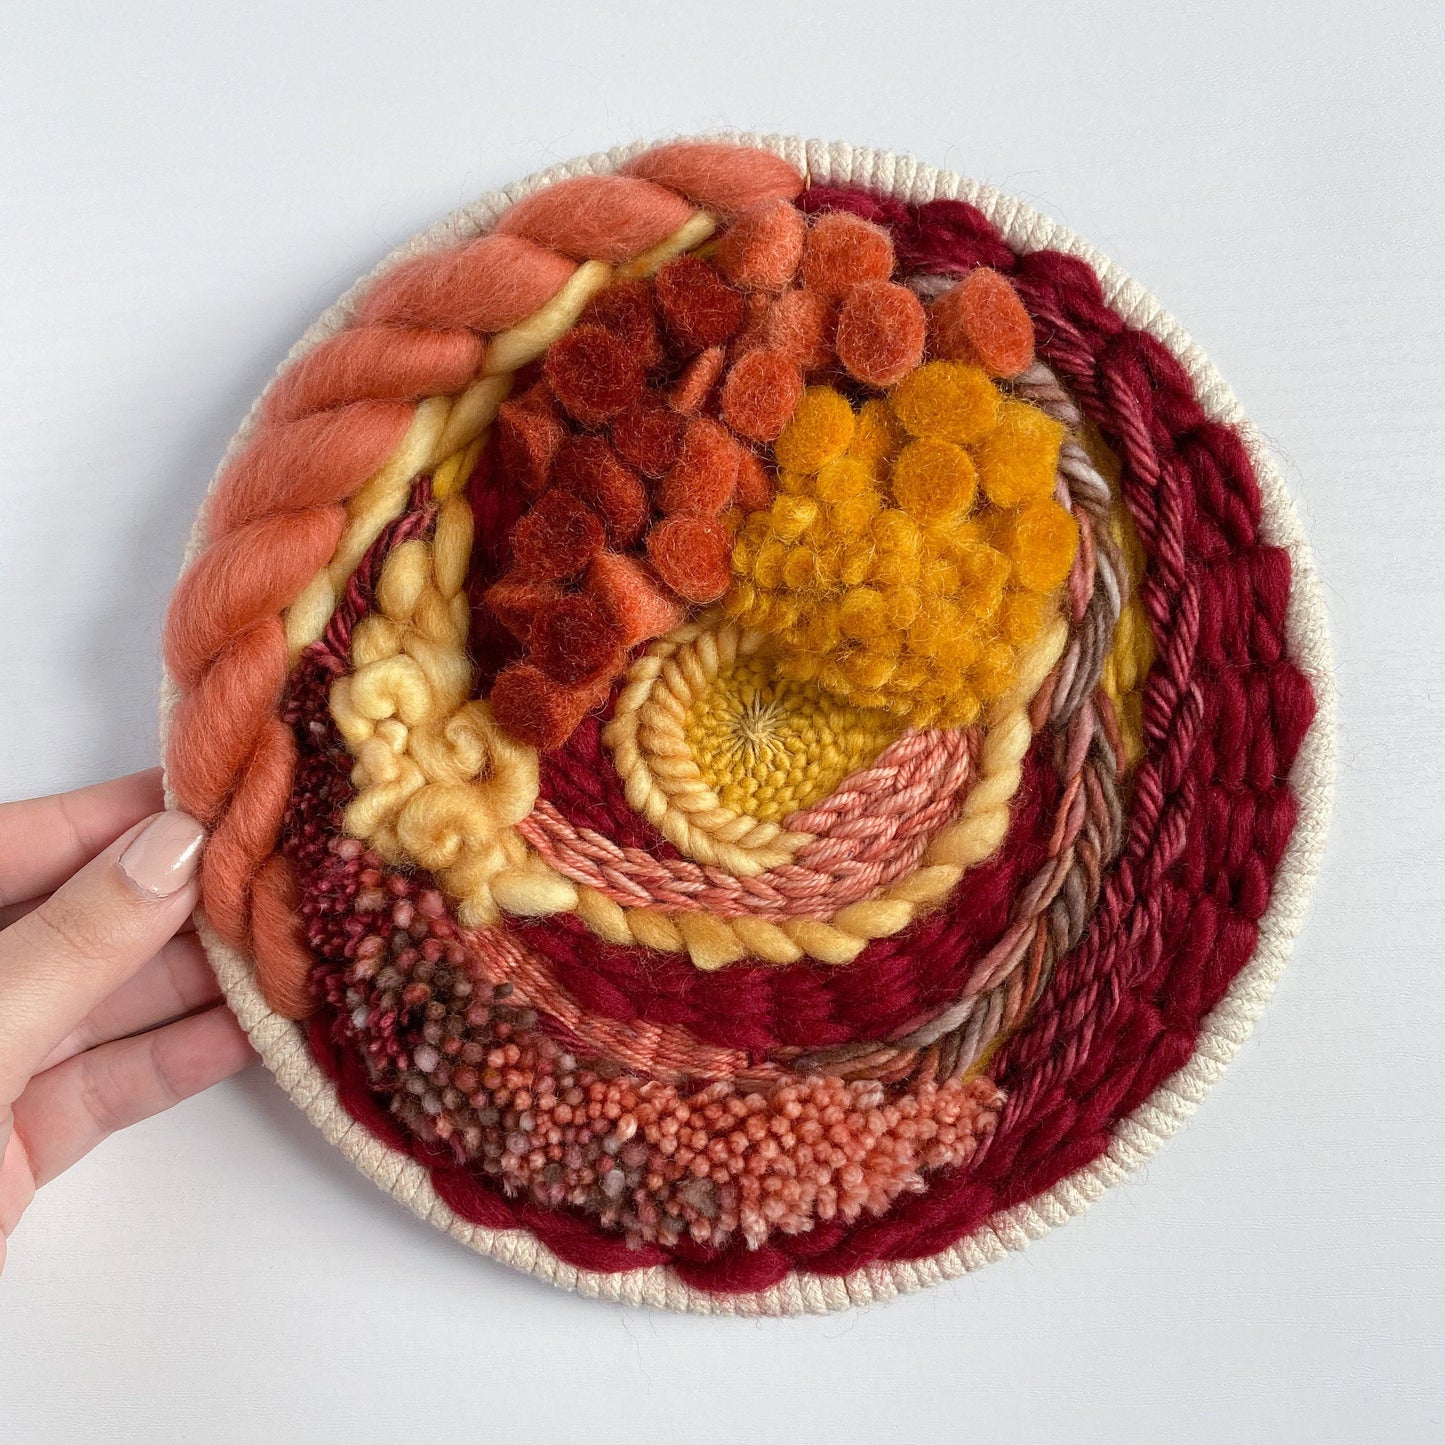 Autumn Leaves - Woven Wall Hanging